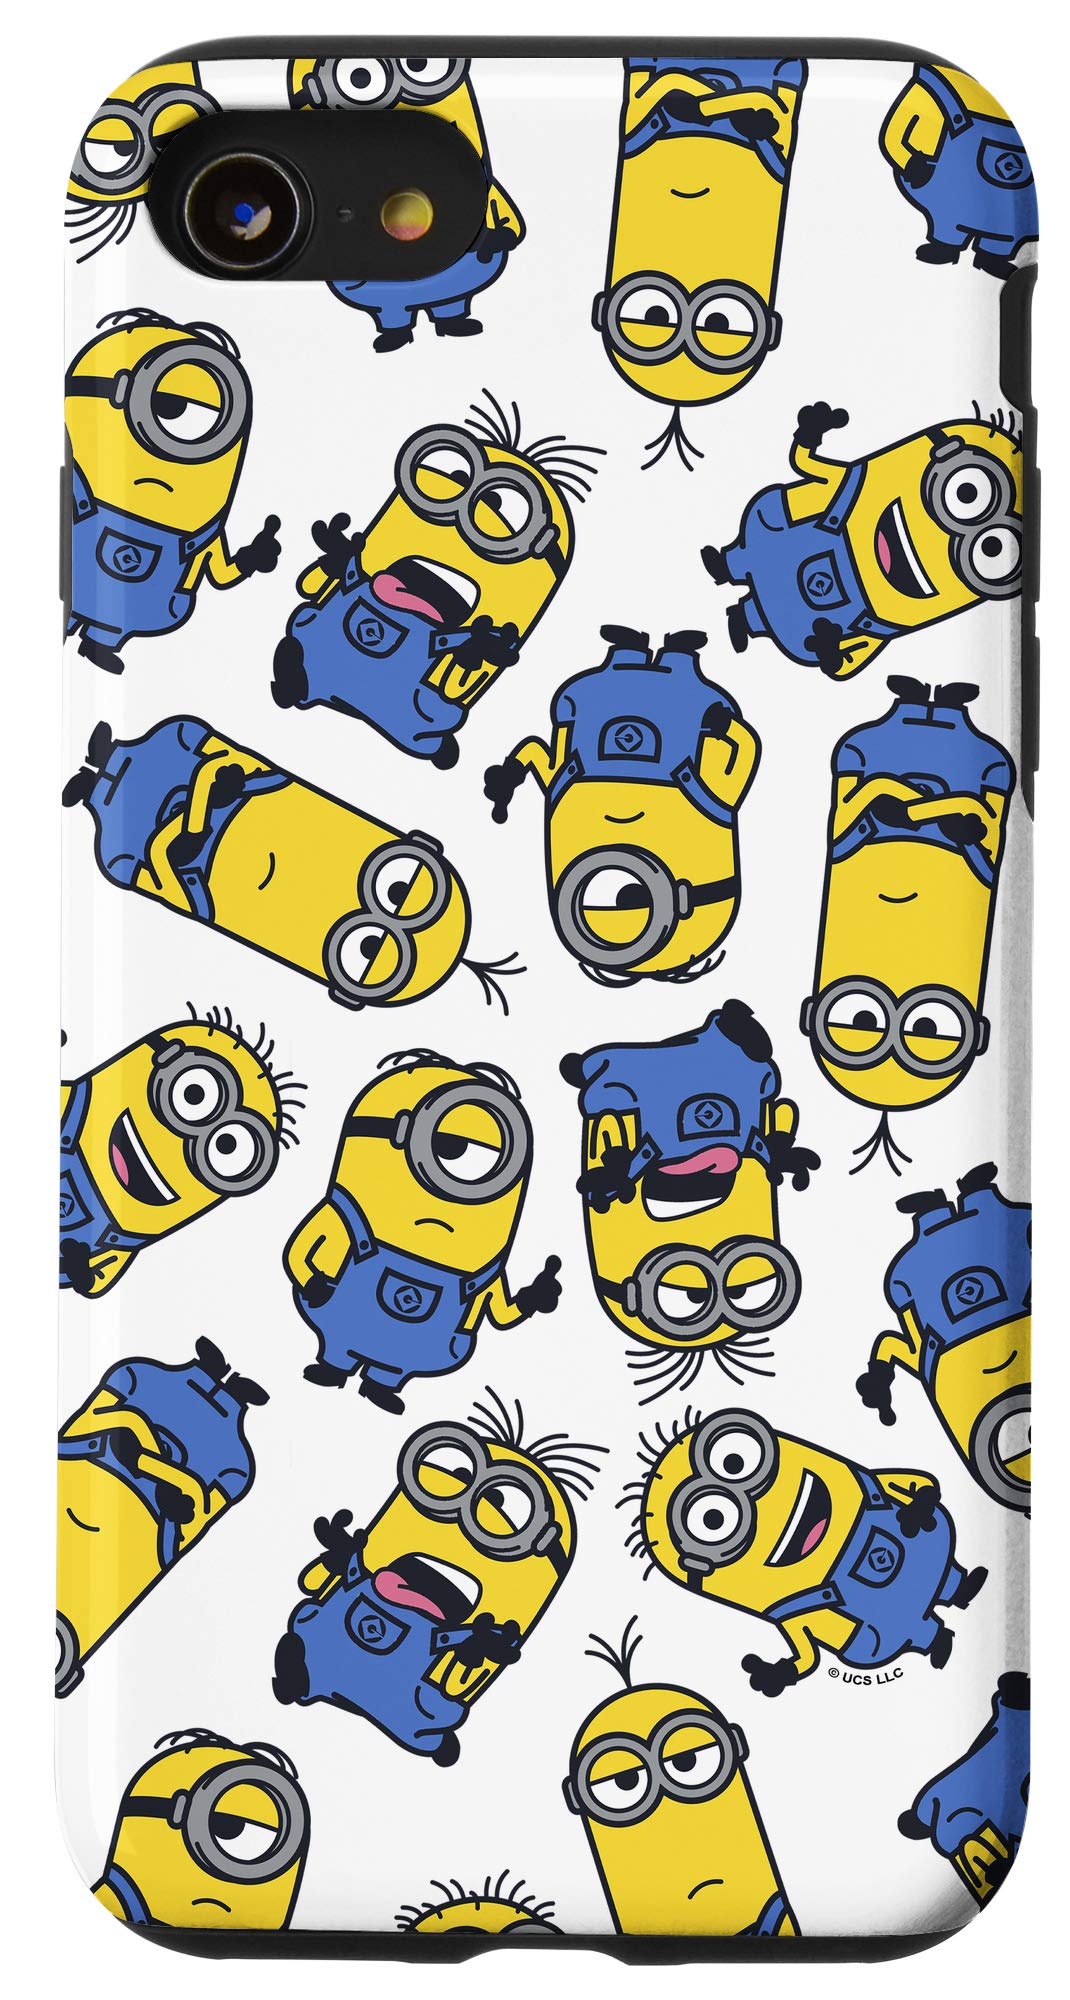 Minions 2020 Wallpapers